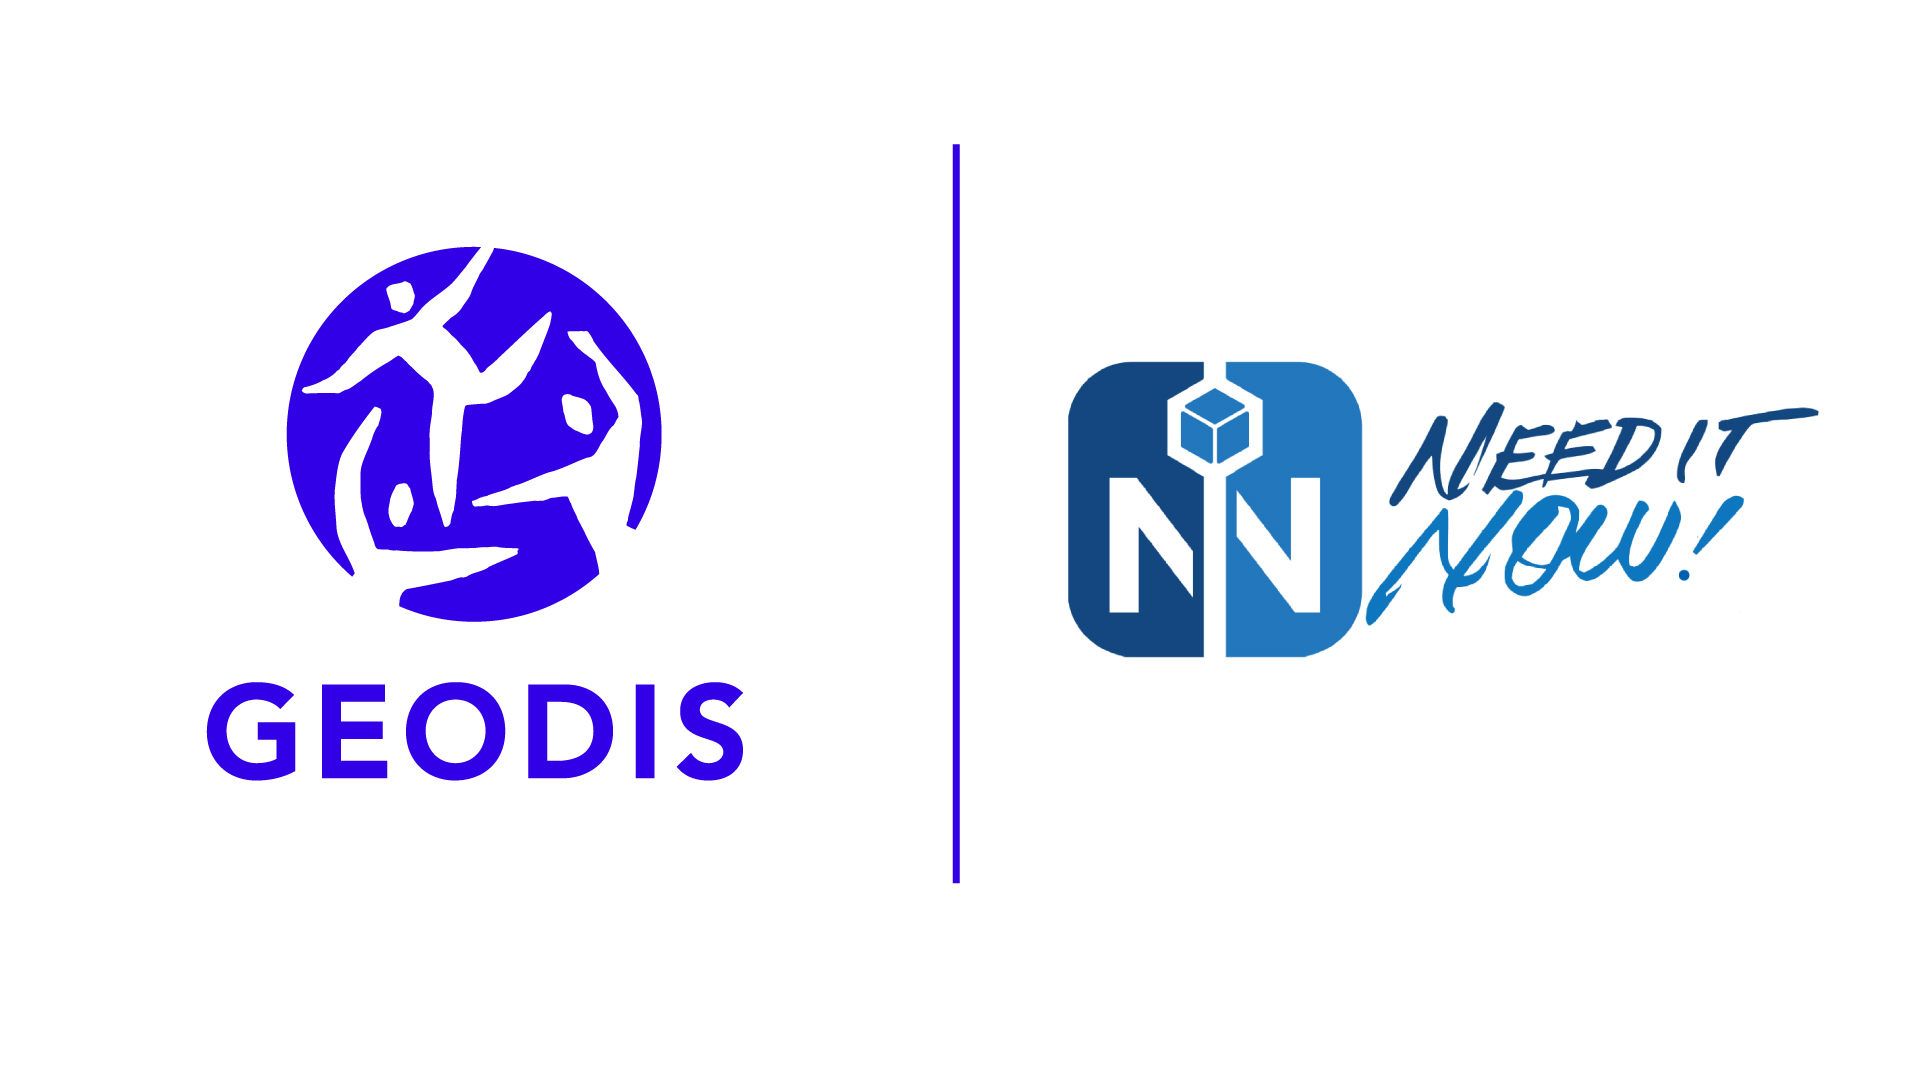 GEODIS to acquire Need It Now Delivers to significantly strengthen its U.S. offerings | GEODIS United States